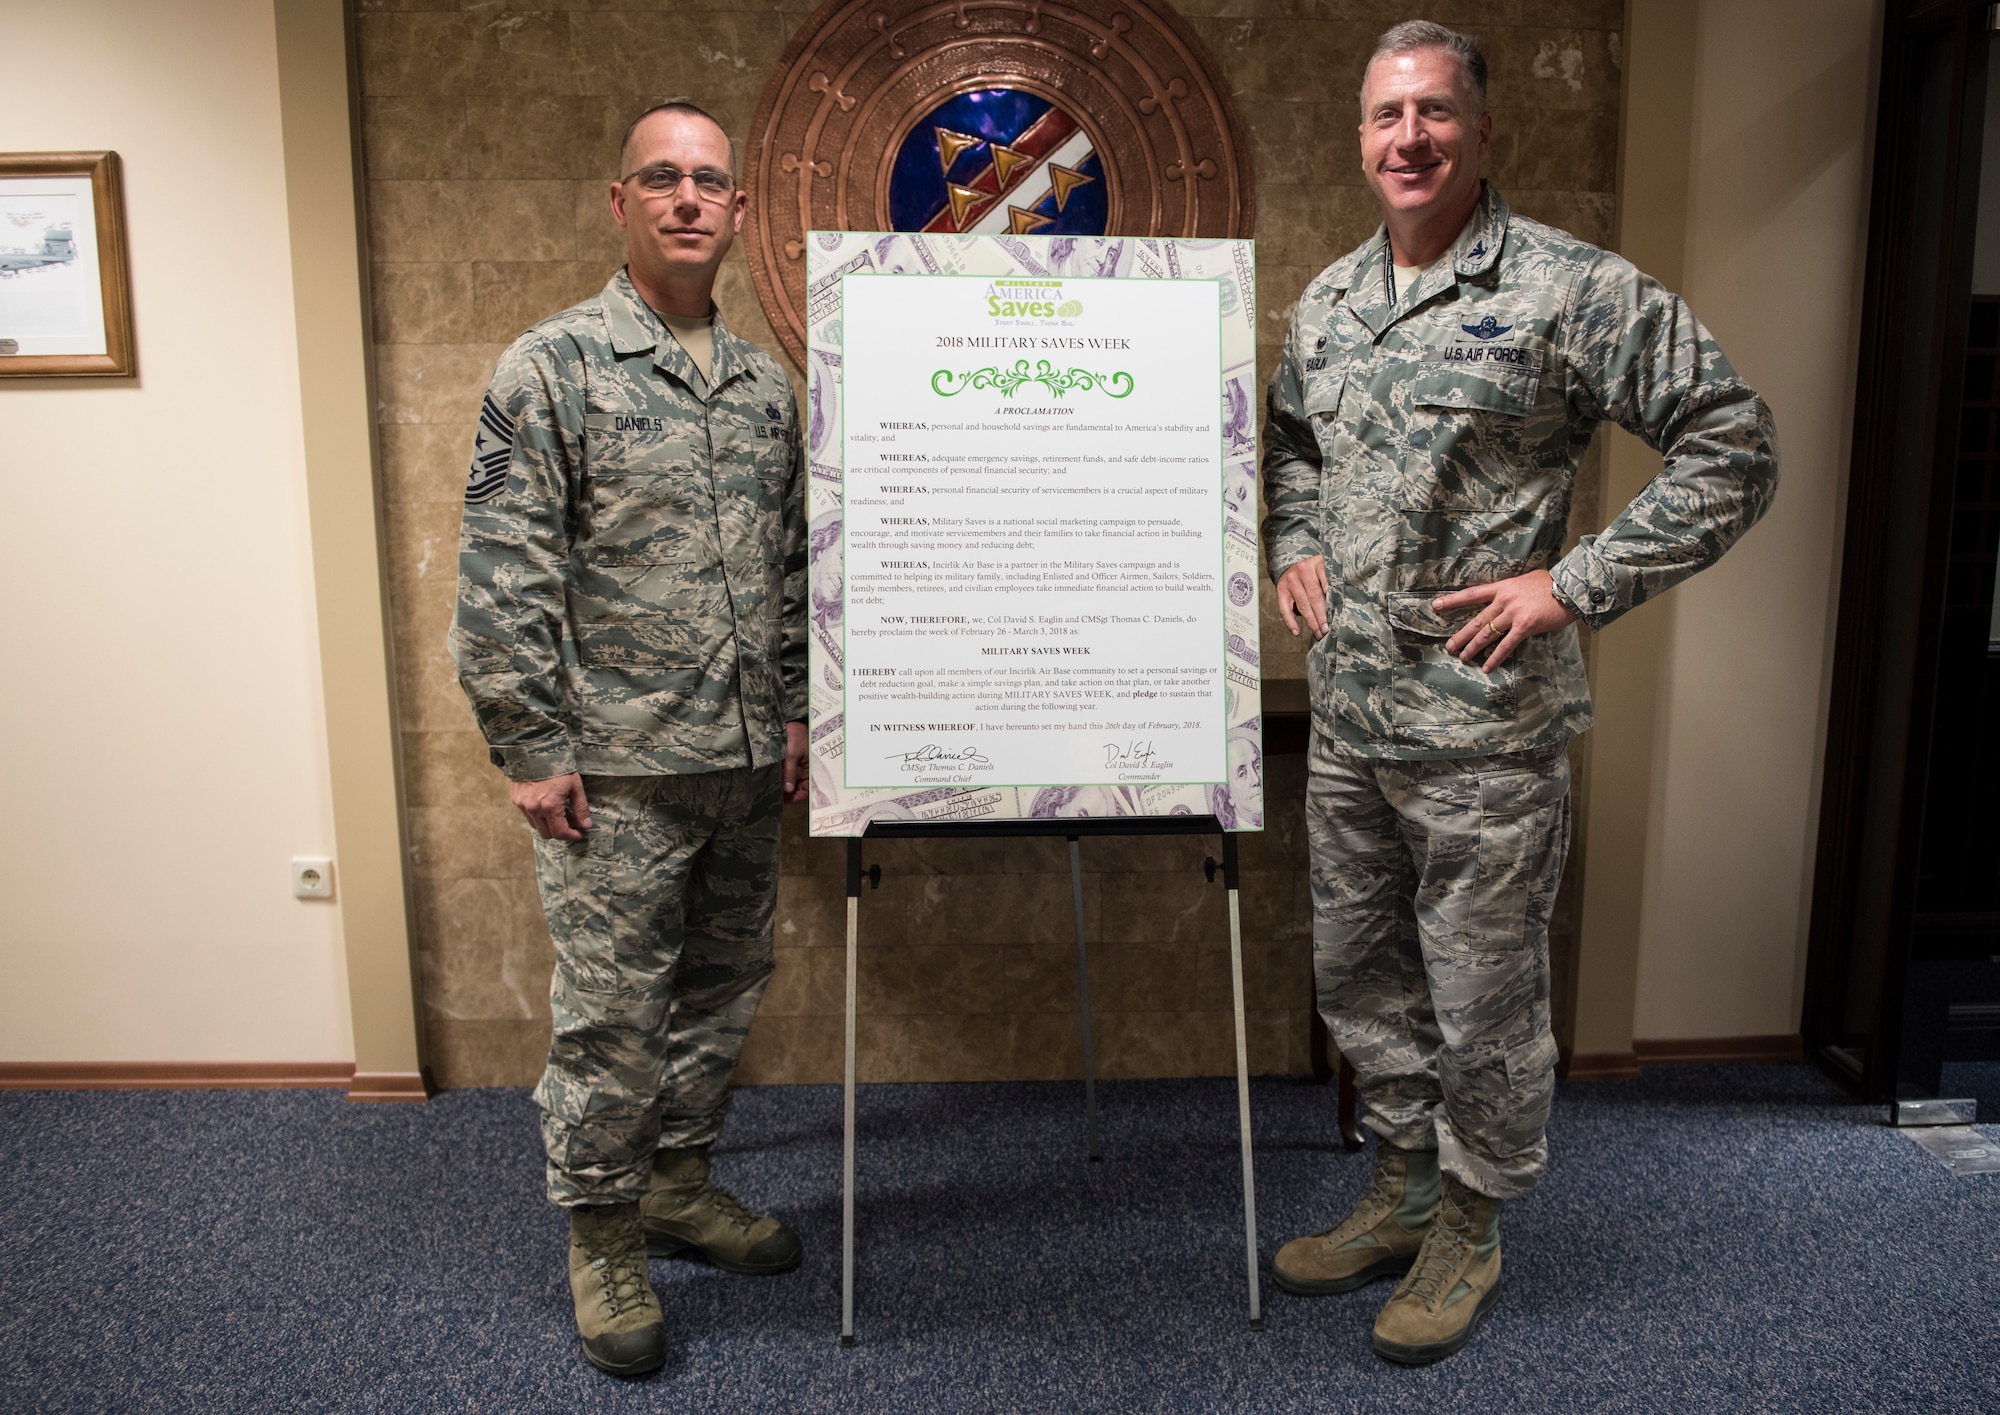 U.S. Air Force Chief Master Sgt. Thomas Daniels, 39th Air Base Wing command chief, and U.S. Air Force Col. David Eaglin, 39th ABW commander, pose with the signed Military Saves Week proclamatio